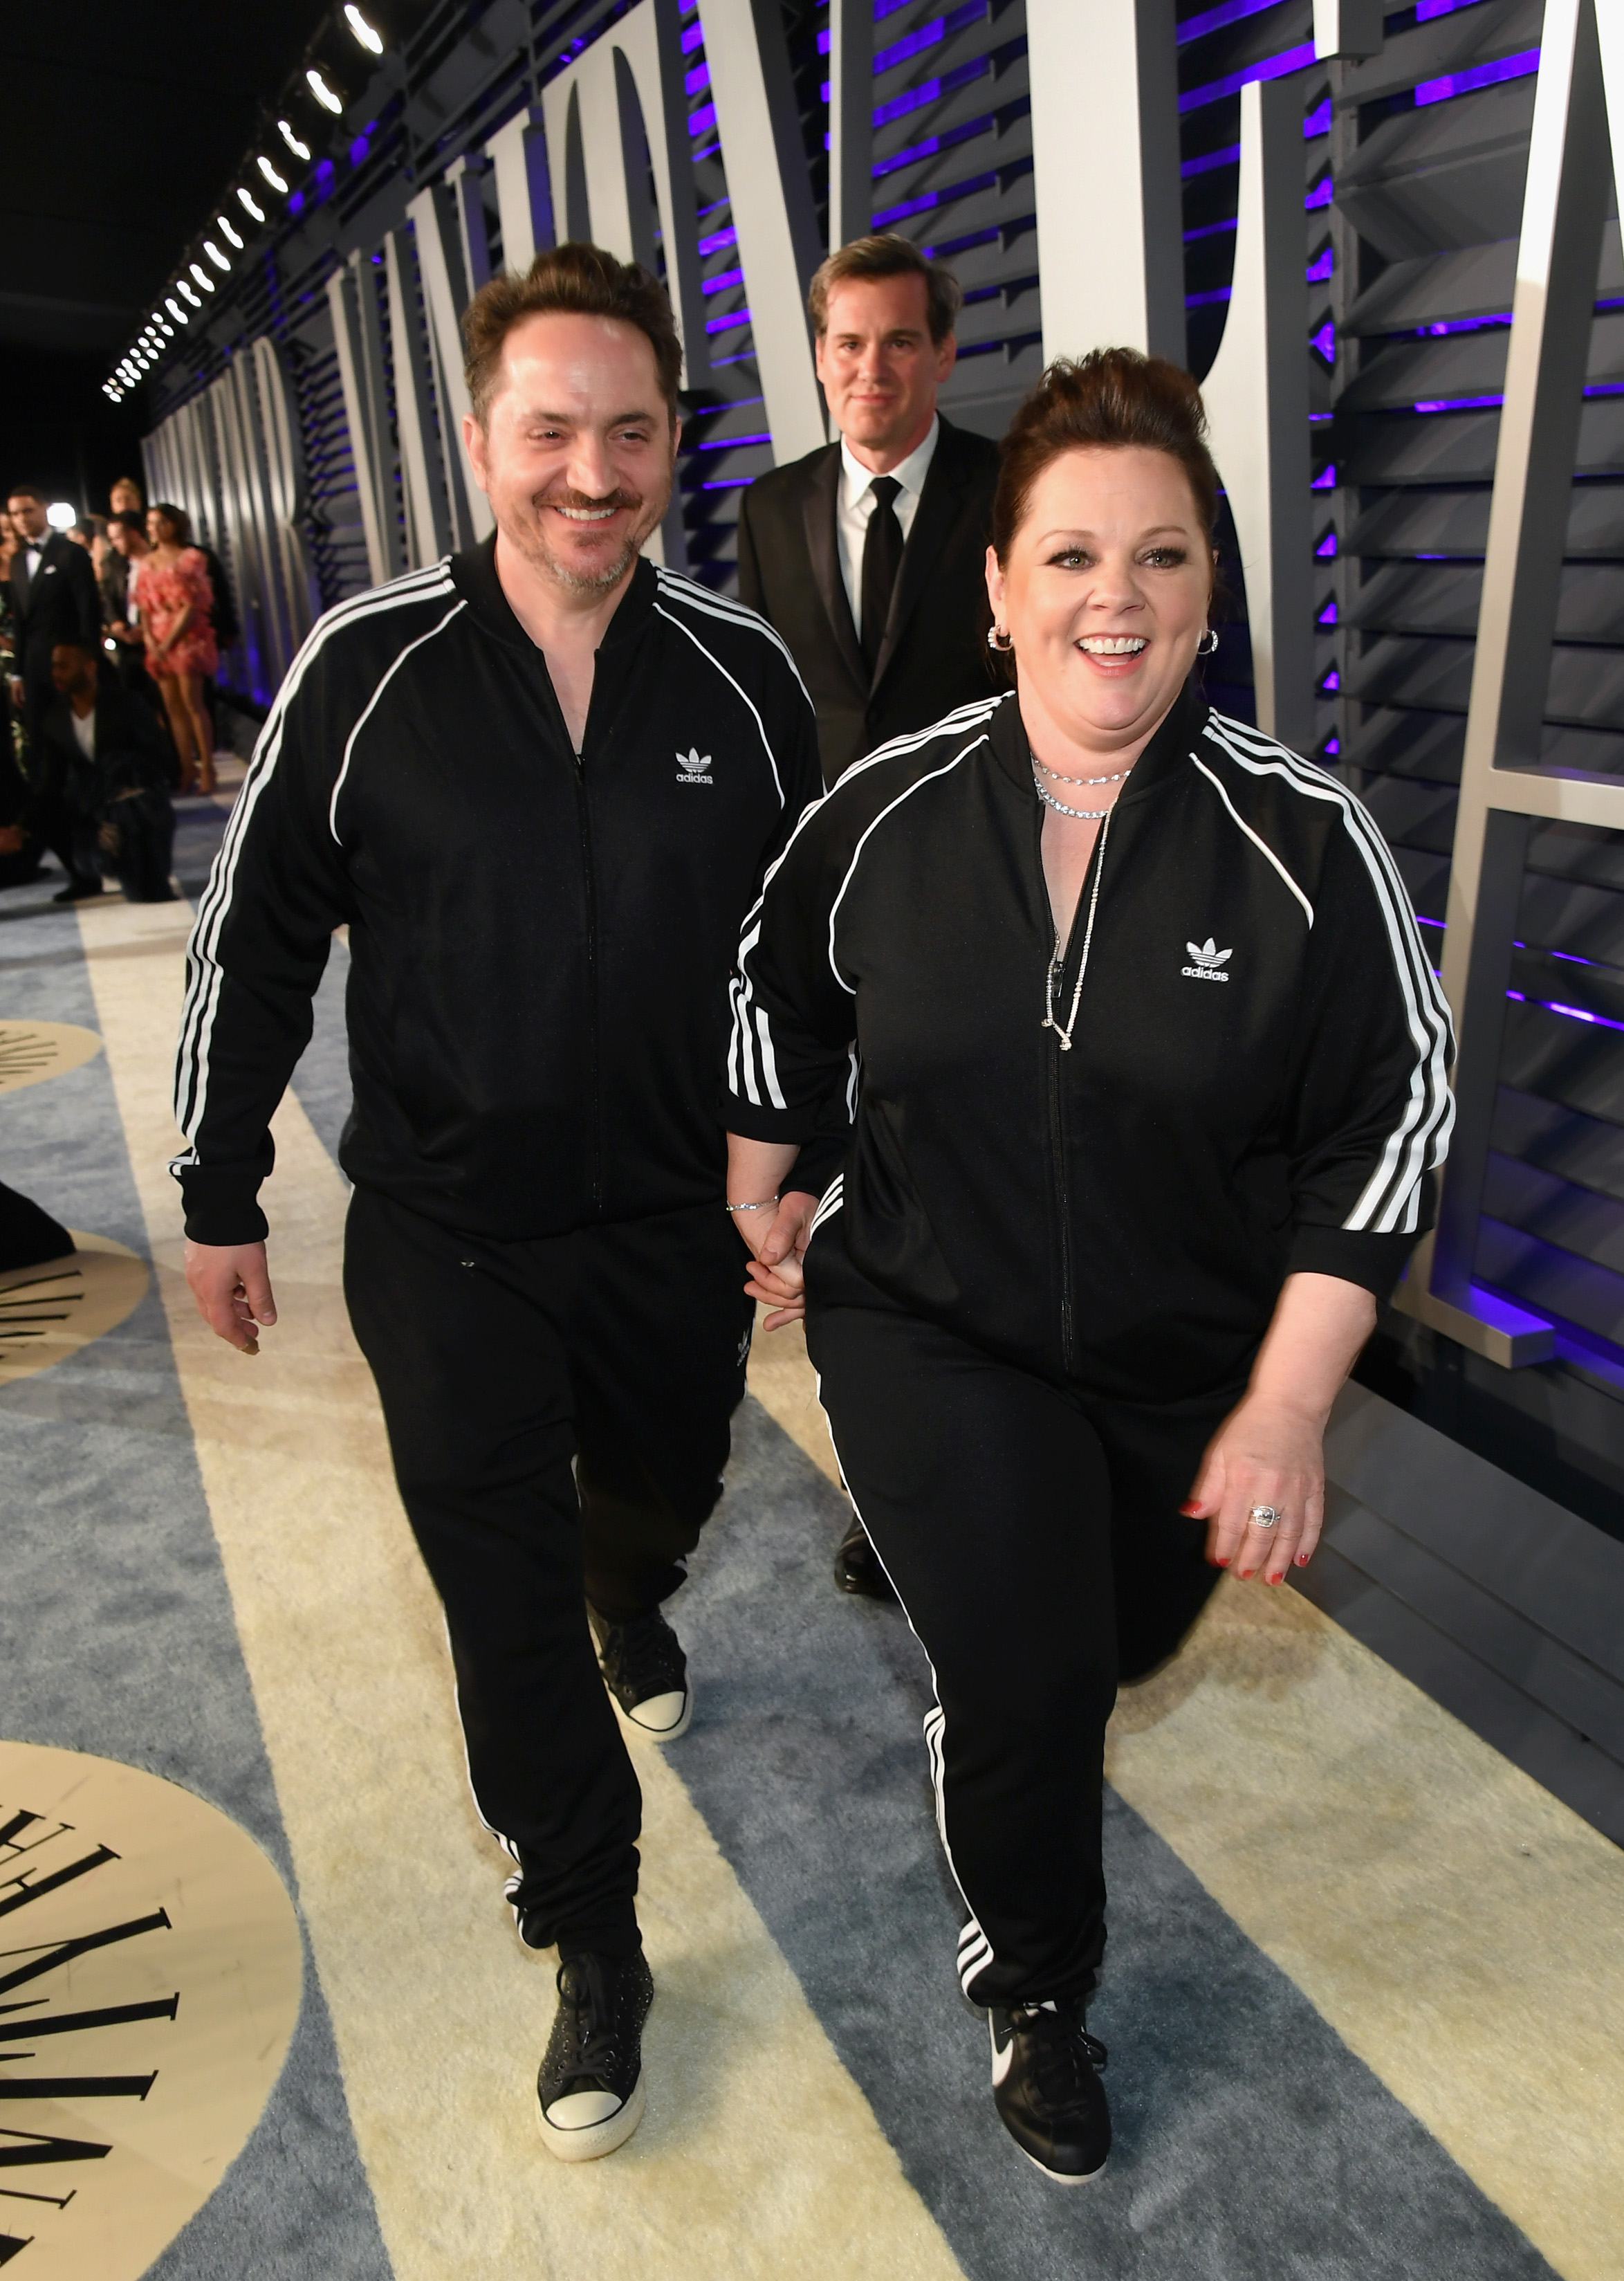 Melissa McCarthy and Ben Falcone attends the 2019 Vanity Fair Oscar Party hosted by Radhika Jones at Wallis Annenberg Center for the Performing Arts on February 24, 2019 in Beverly Hills, California. 